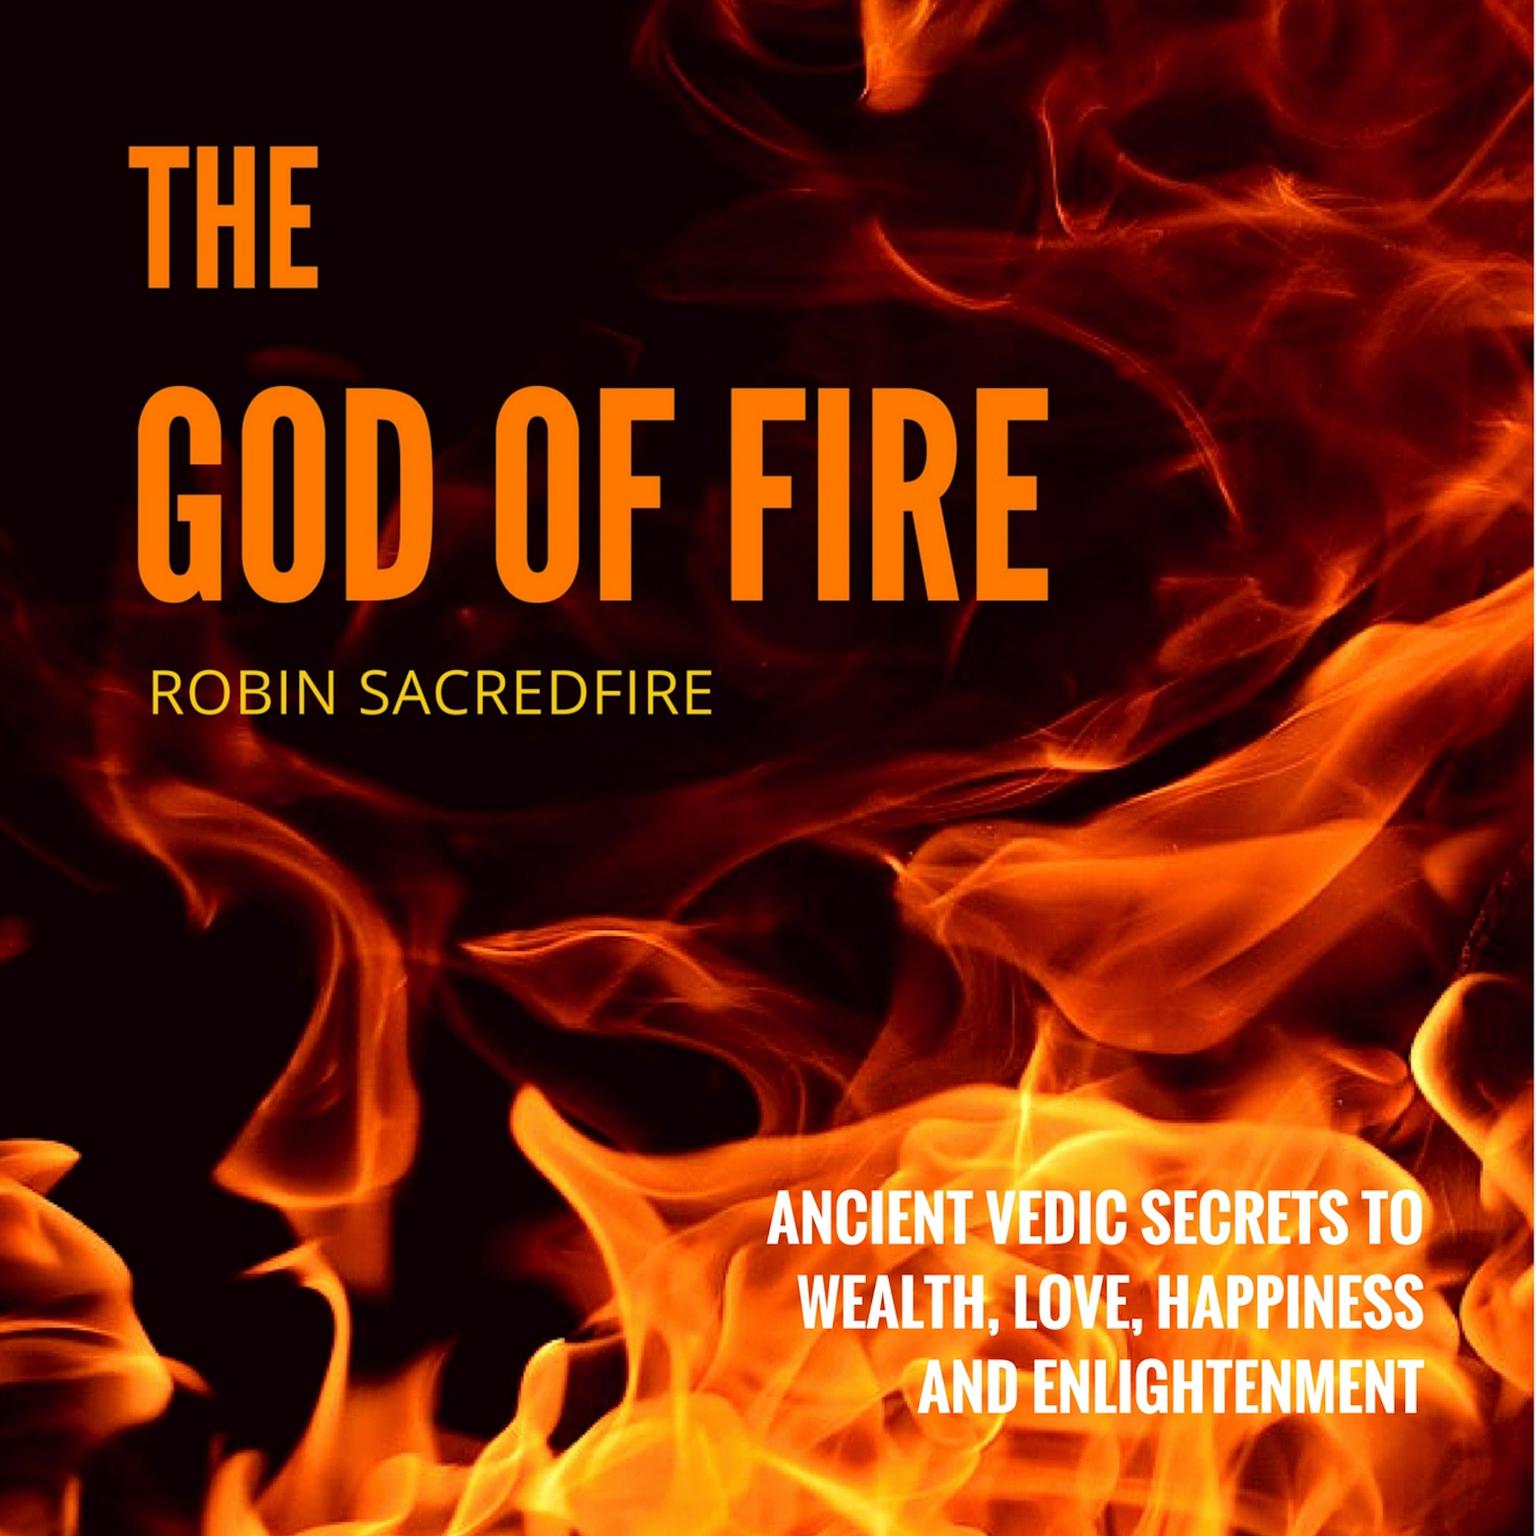 The God of Fire: Ancient Vedic Secrets to Wealth, Love, Happiness and Enlightenment Audiobook, by Robin Sacredfire